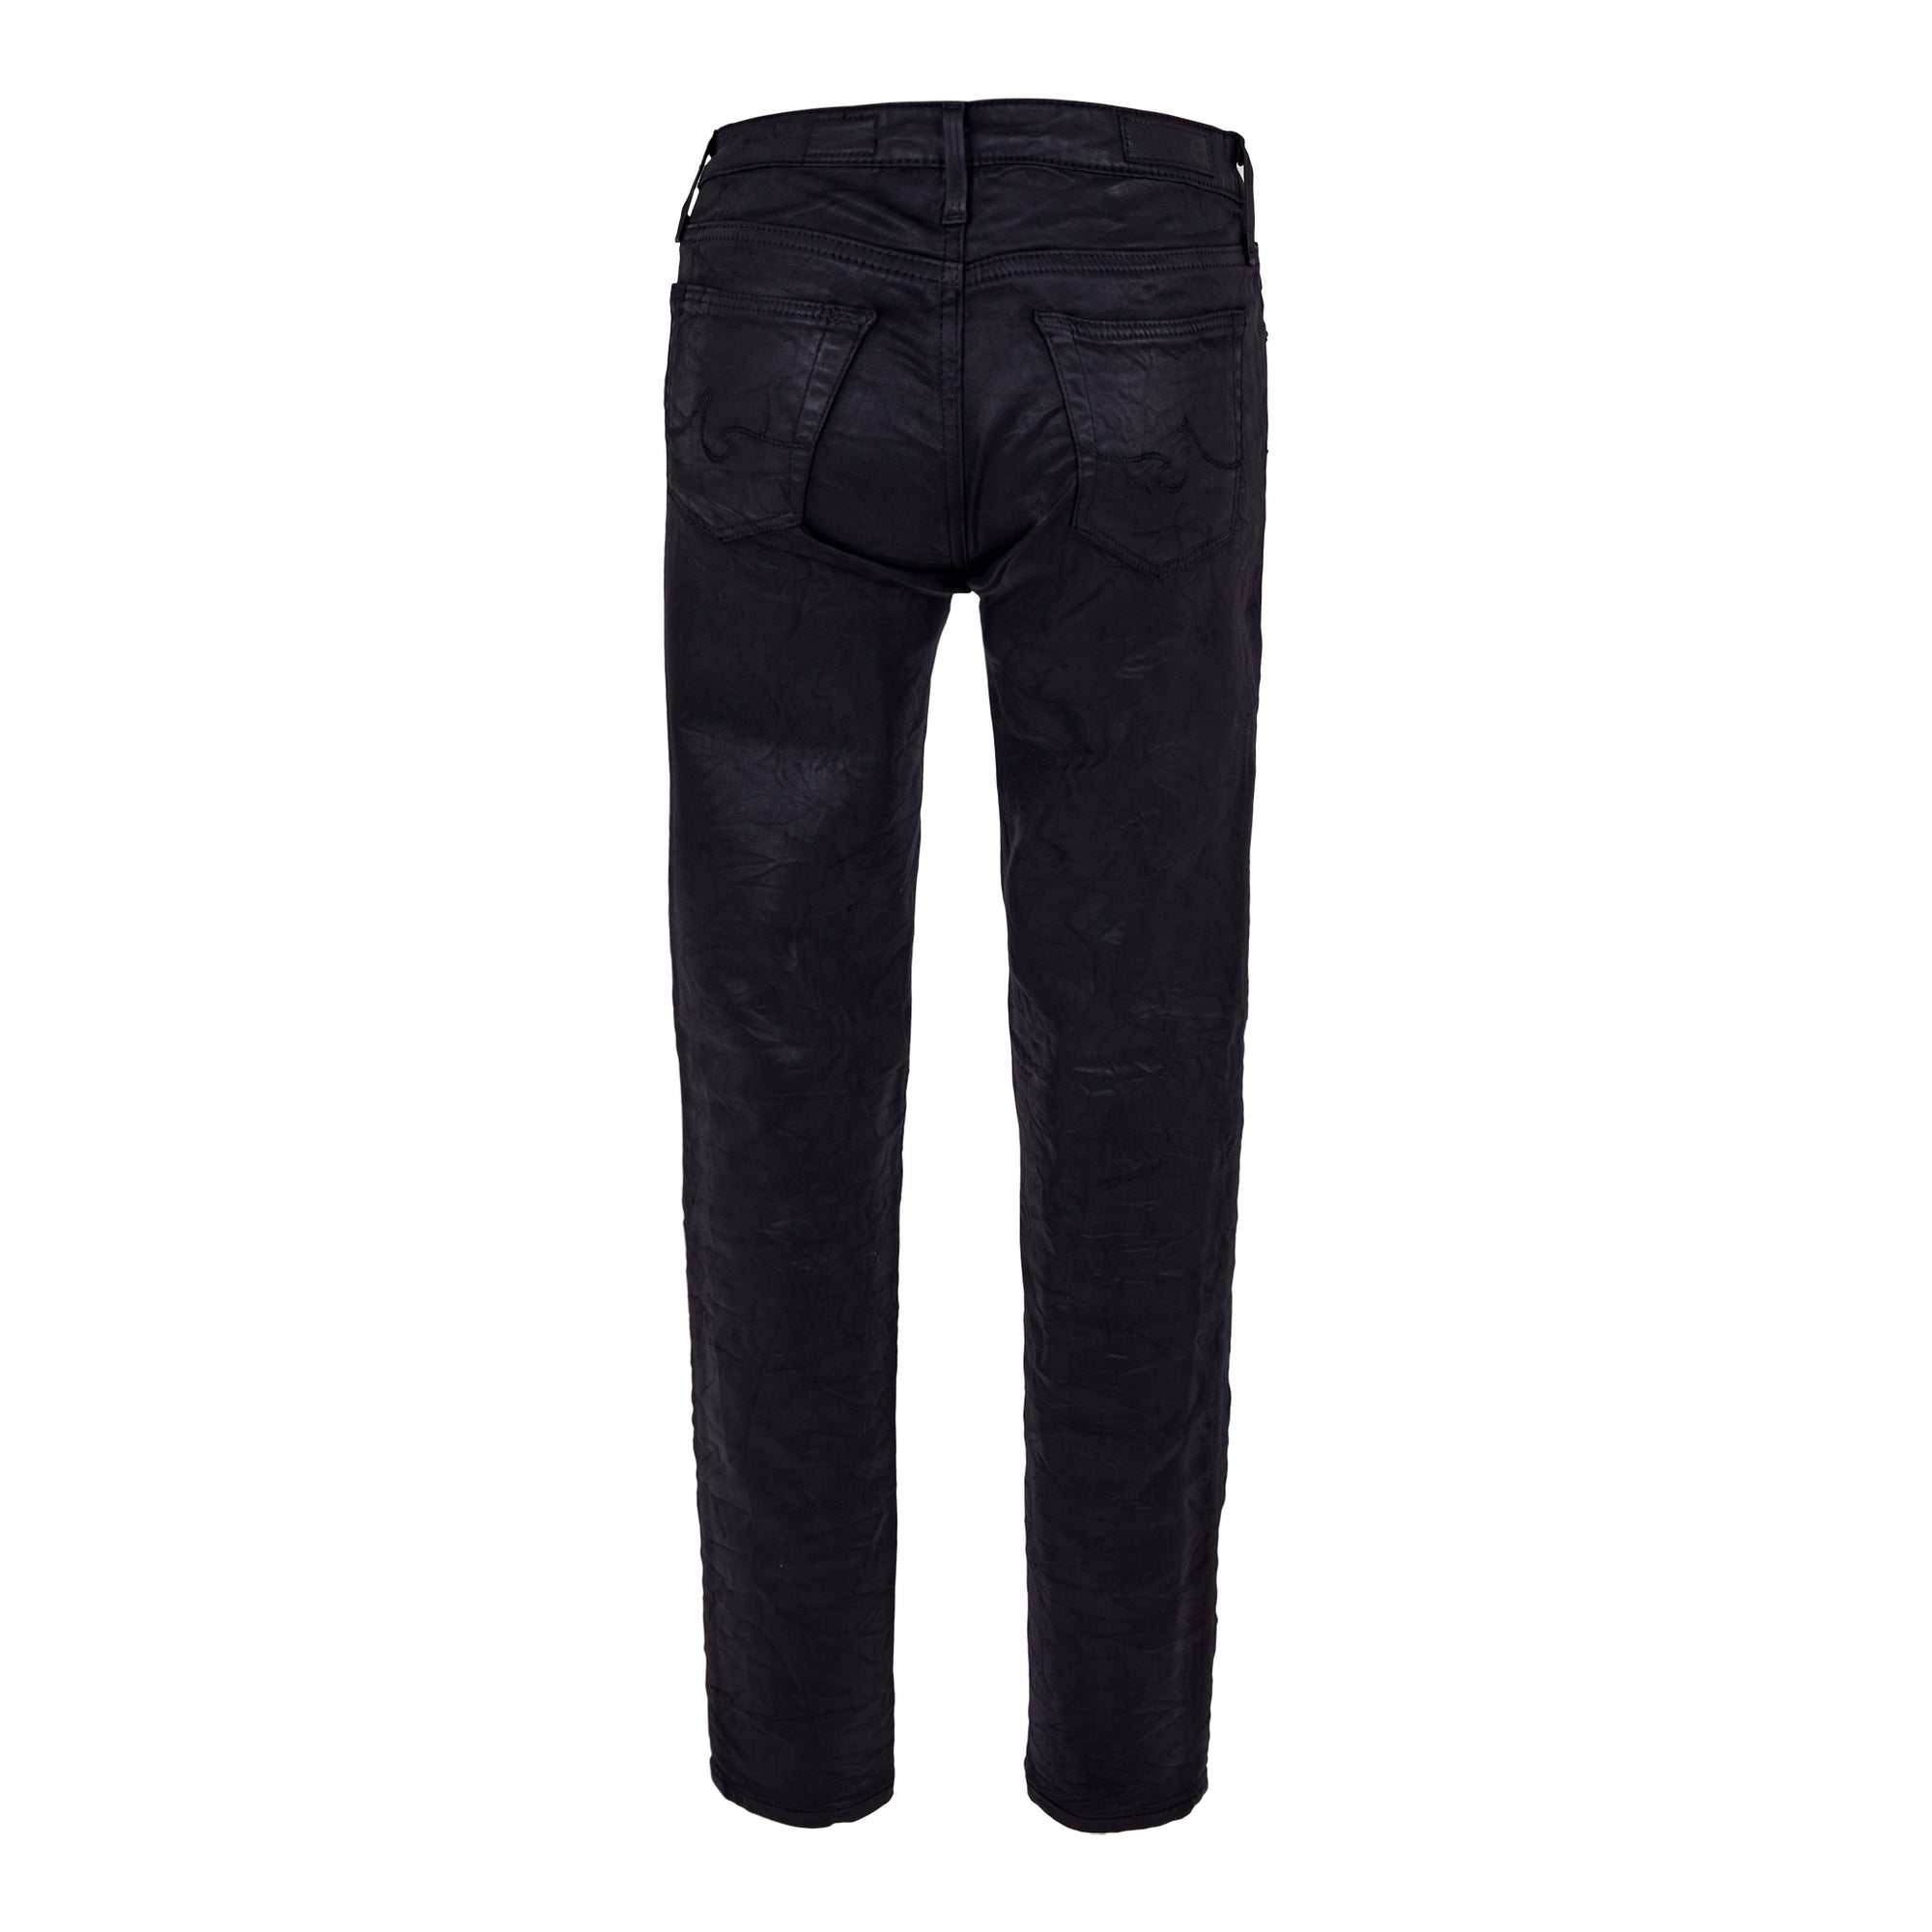 Adriano Goldschmed Super skinny black style pants